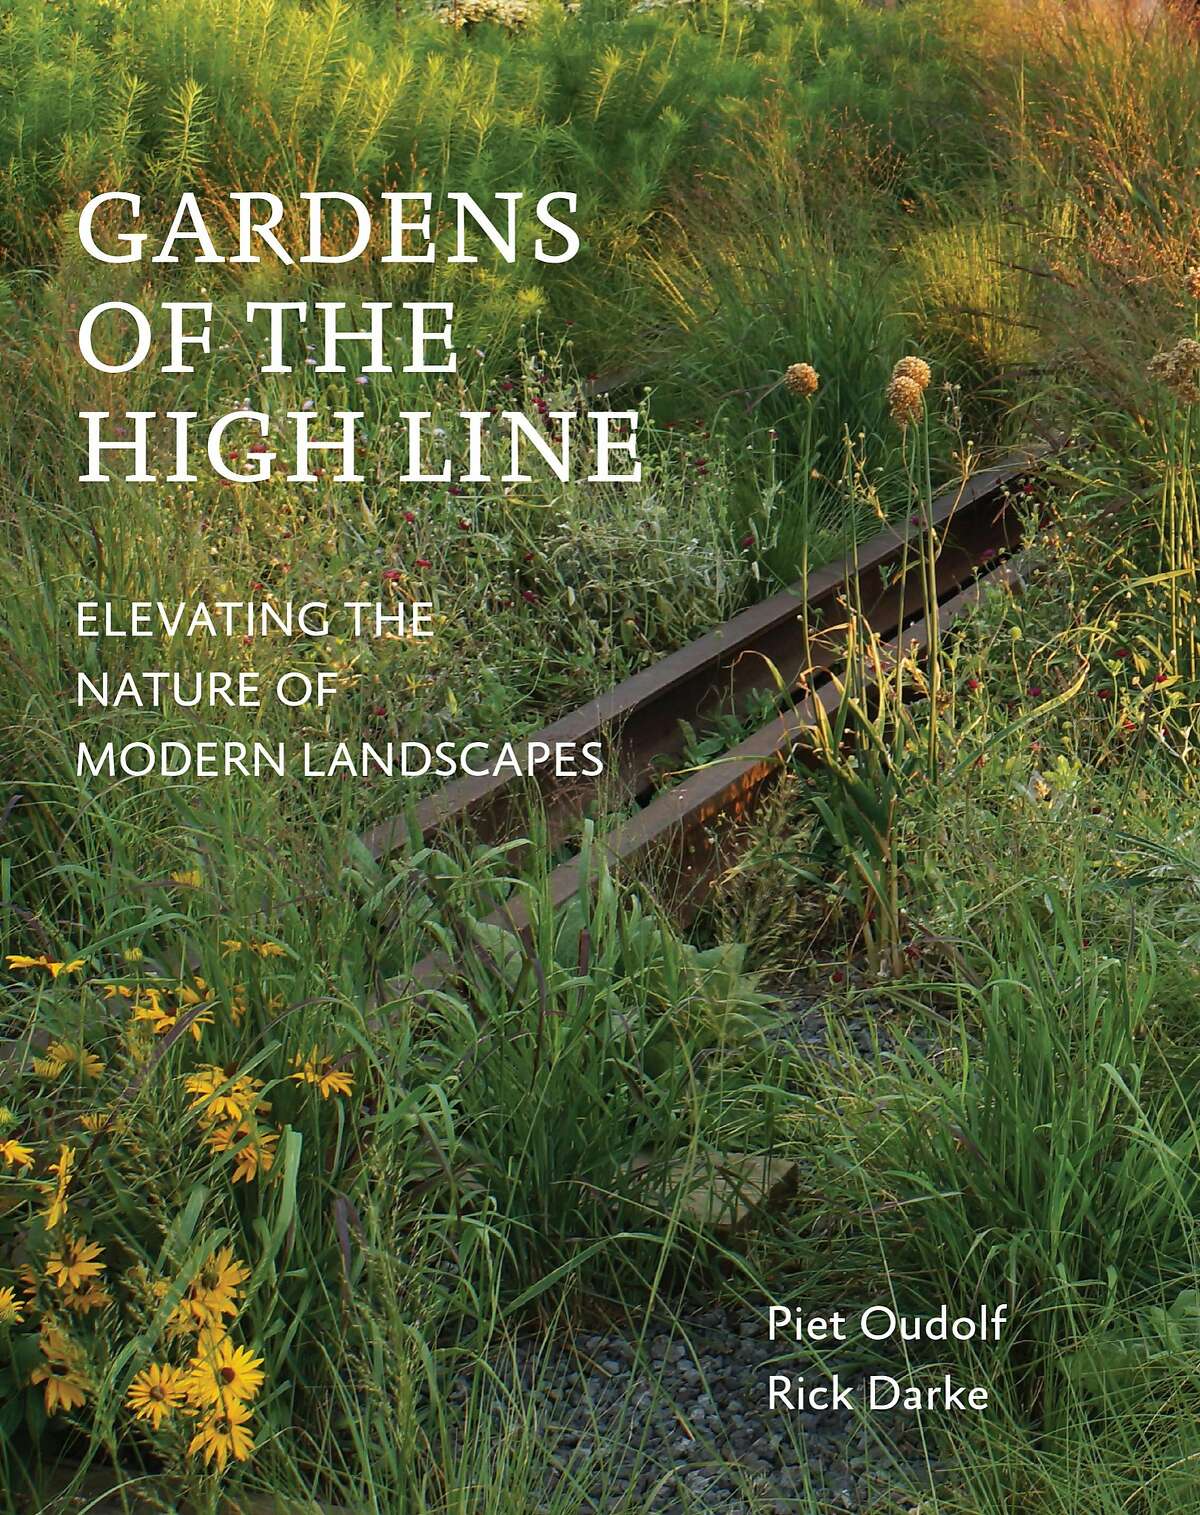 "Gardens of the High Line, Elevating the Nature of Modern Landscapes" by Piet Ouldof and Rick Darke